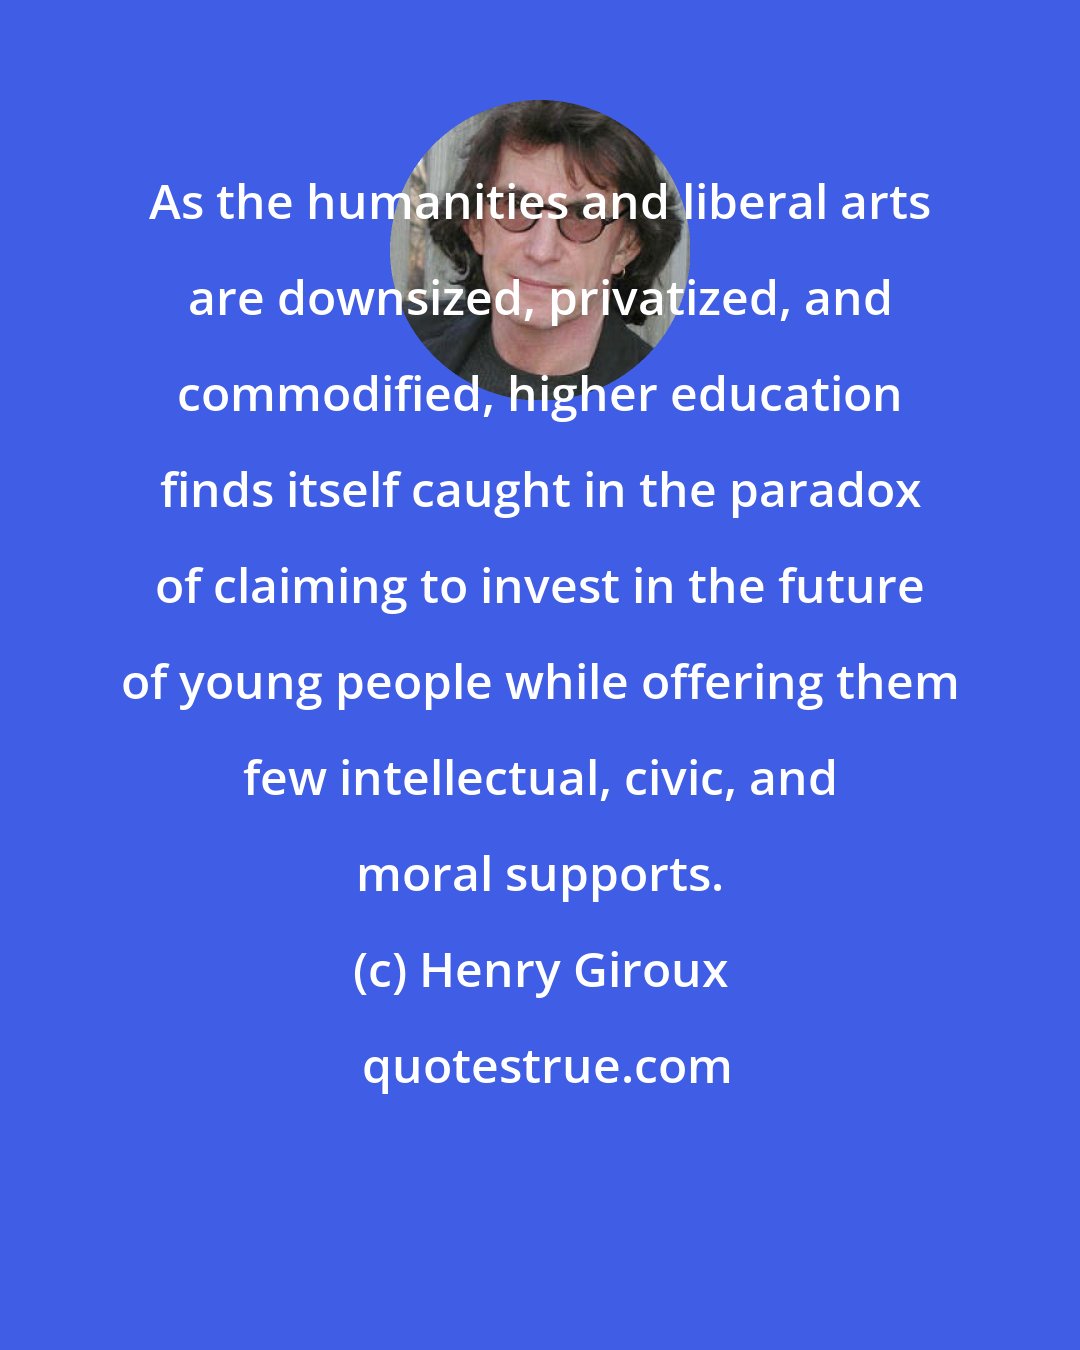 Henry Giroux: As the humanities and liberal arts are downsized, privatized, and commodified, higher education finds itself caught in the paradox of claiming to invest in the future of young people while offering them few intellectual, civic, and moral supports.